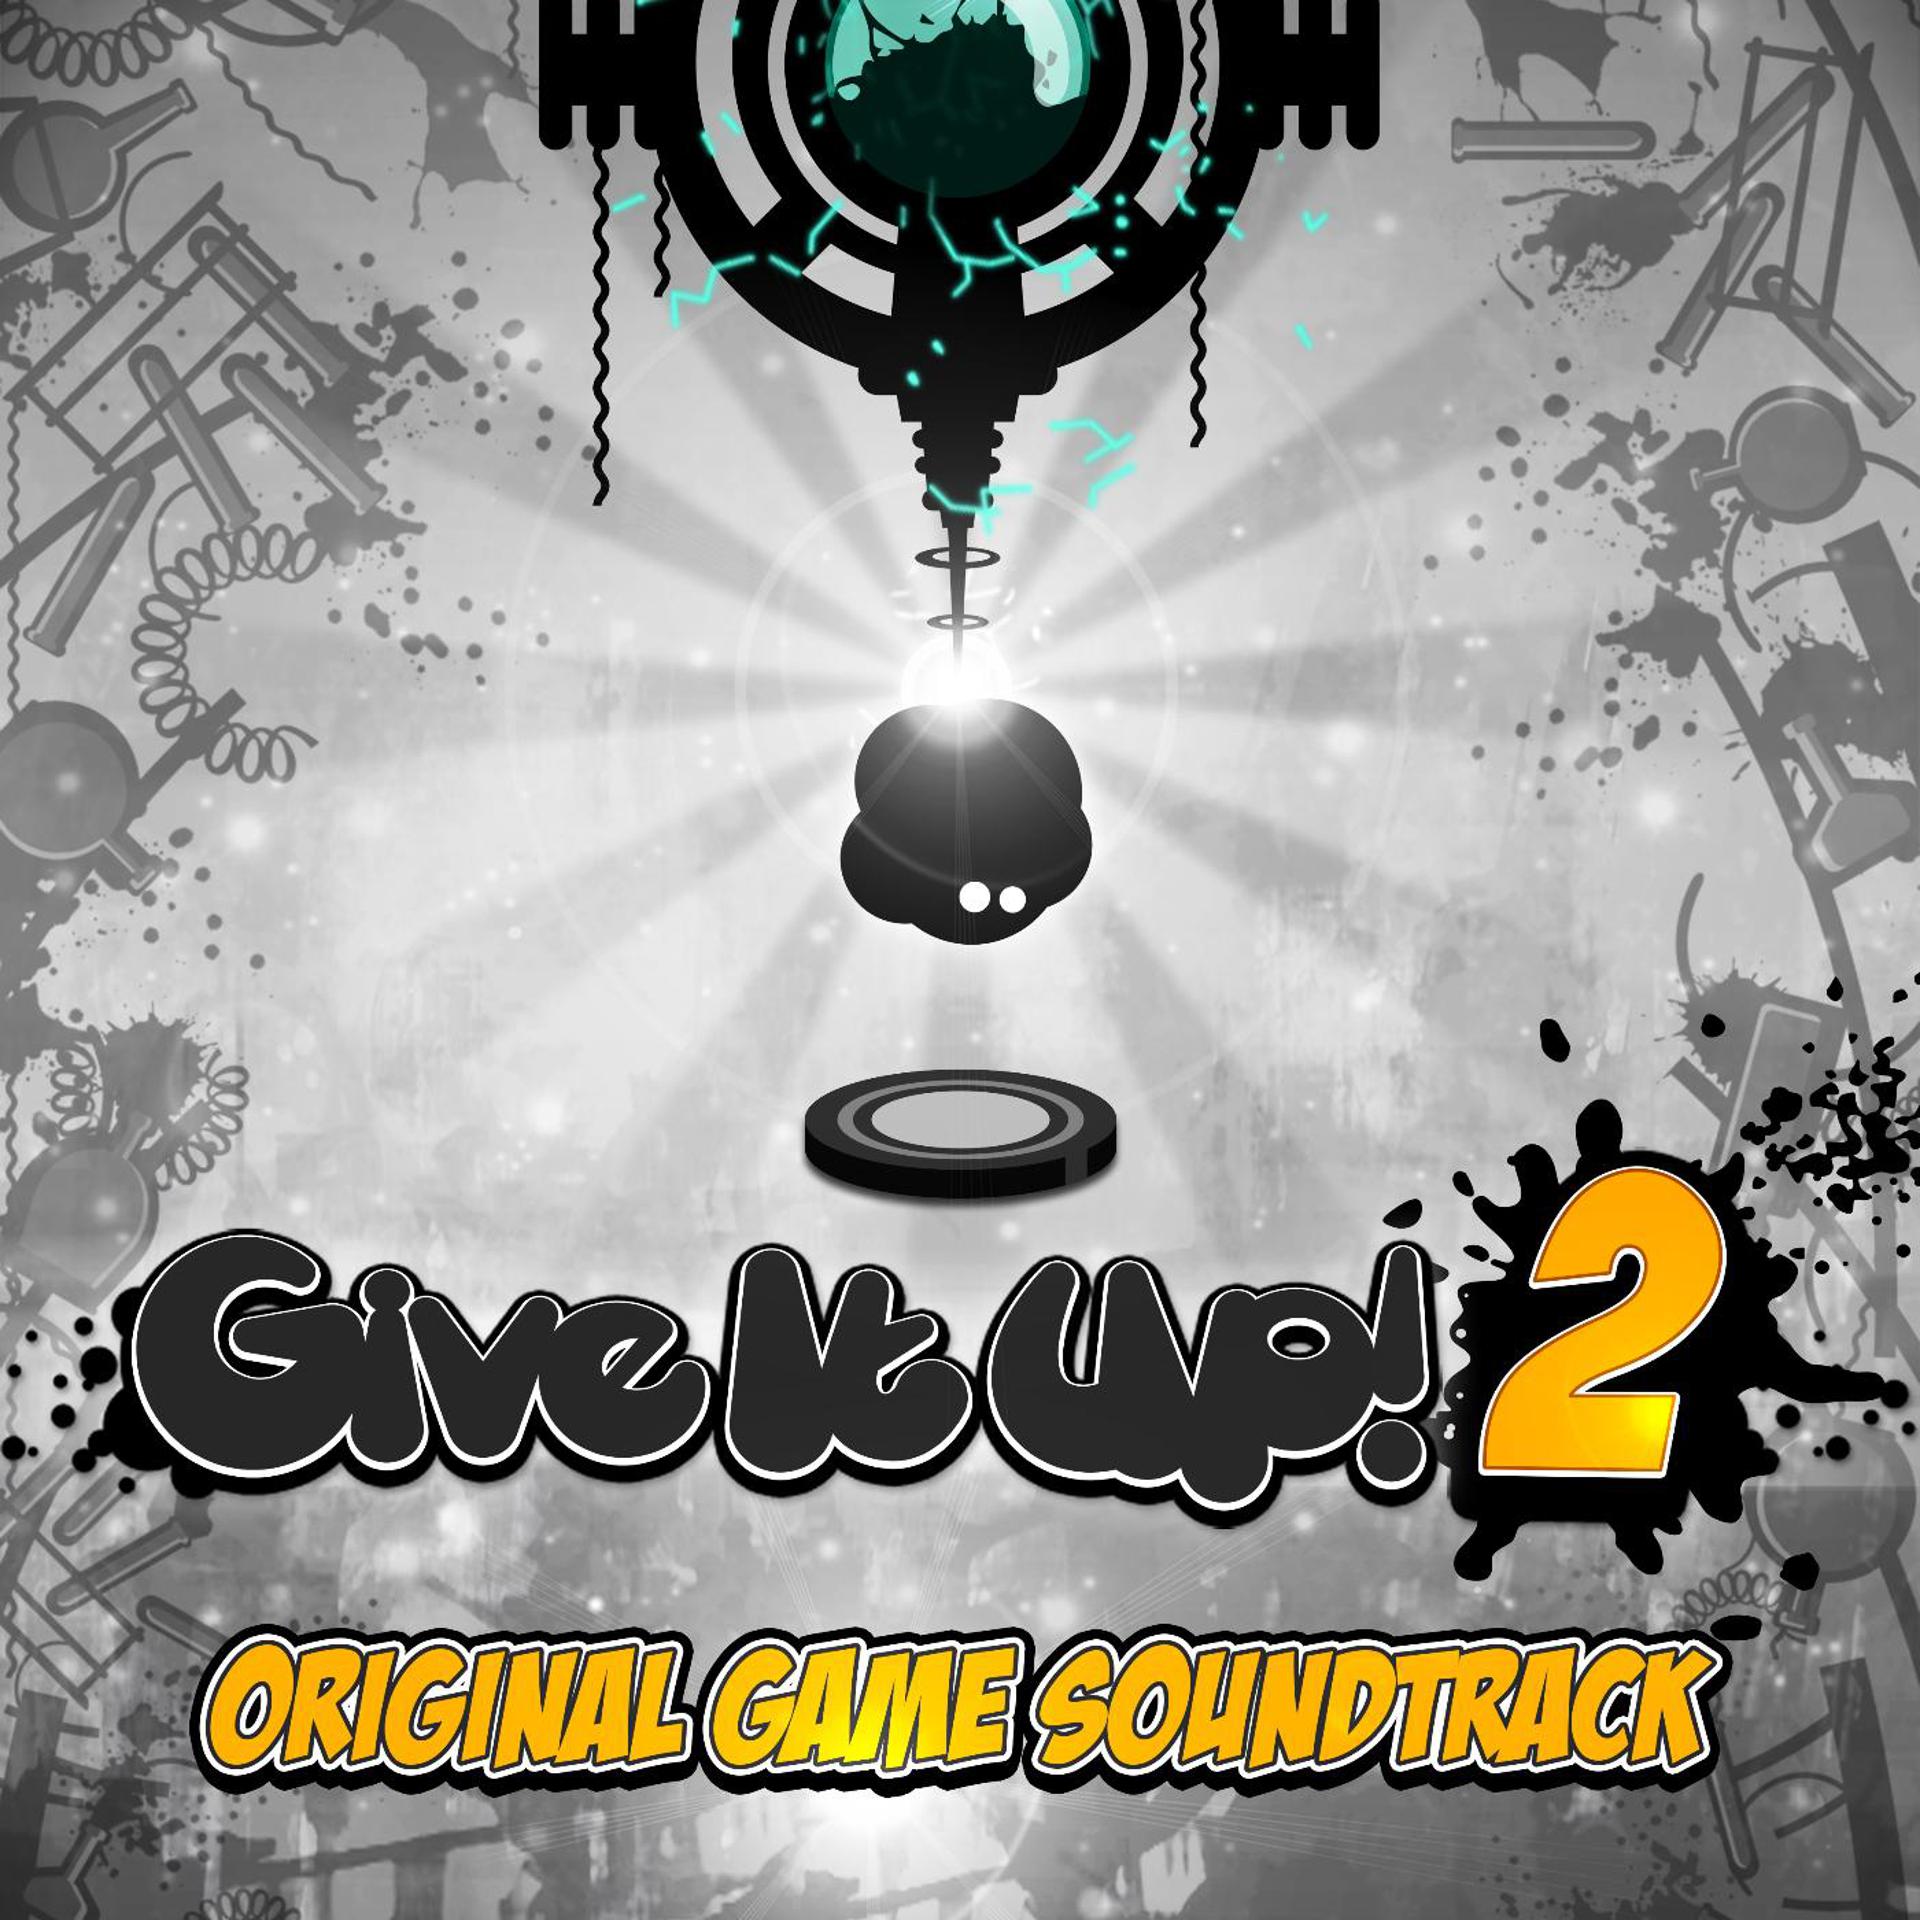 Give it up игра. Альбом give it up. Game Music. Give it up 2 игра oynash.